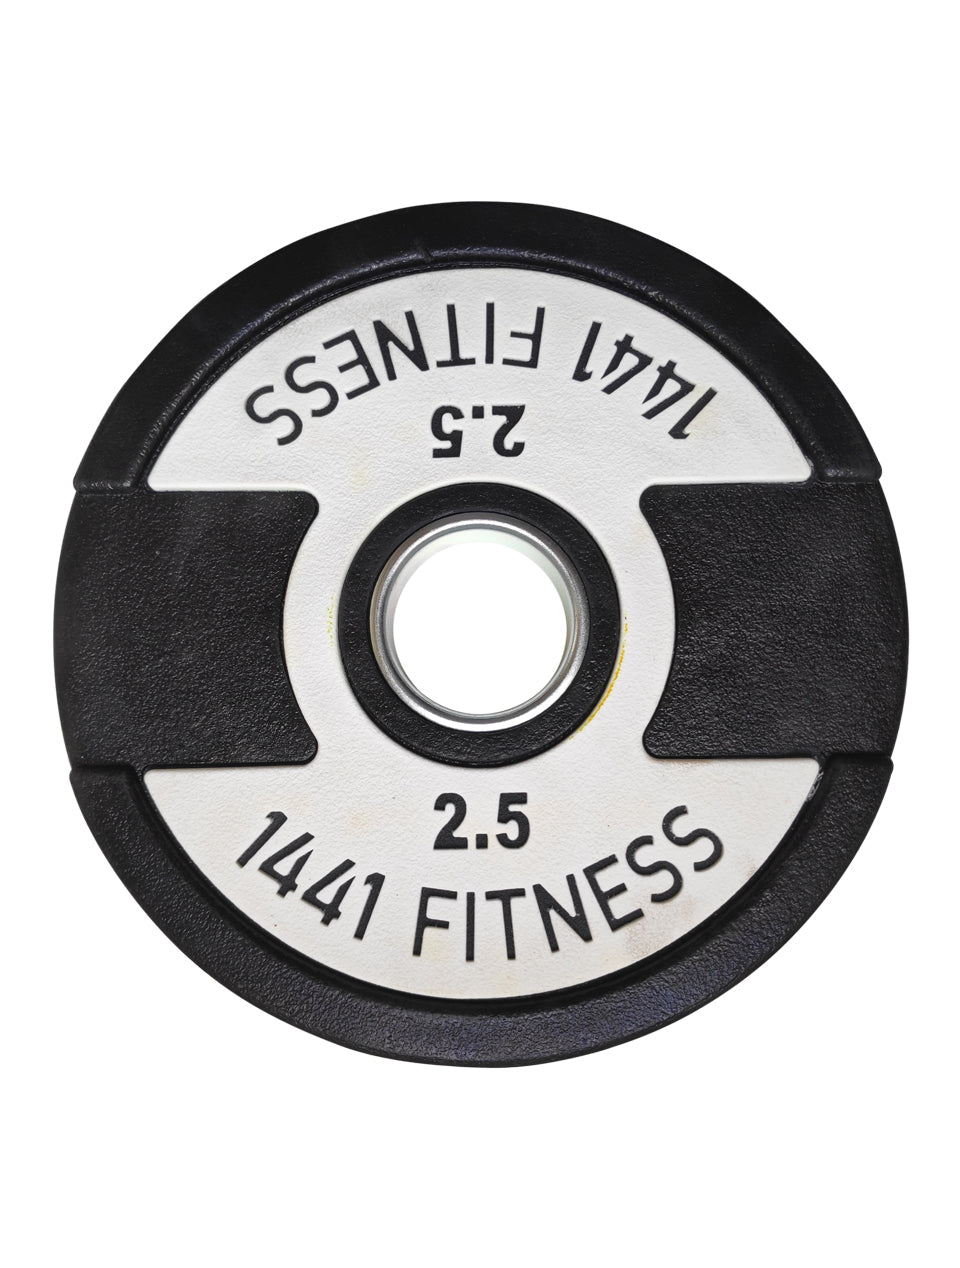 1441 Fitness 7 Ft Olympic Barbell With Dual Grip Plates Set - 100 Kg